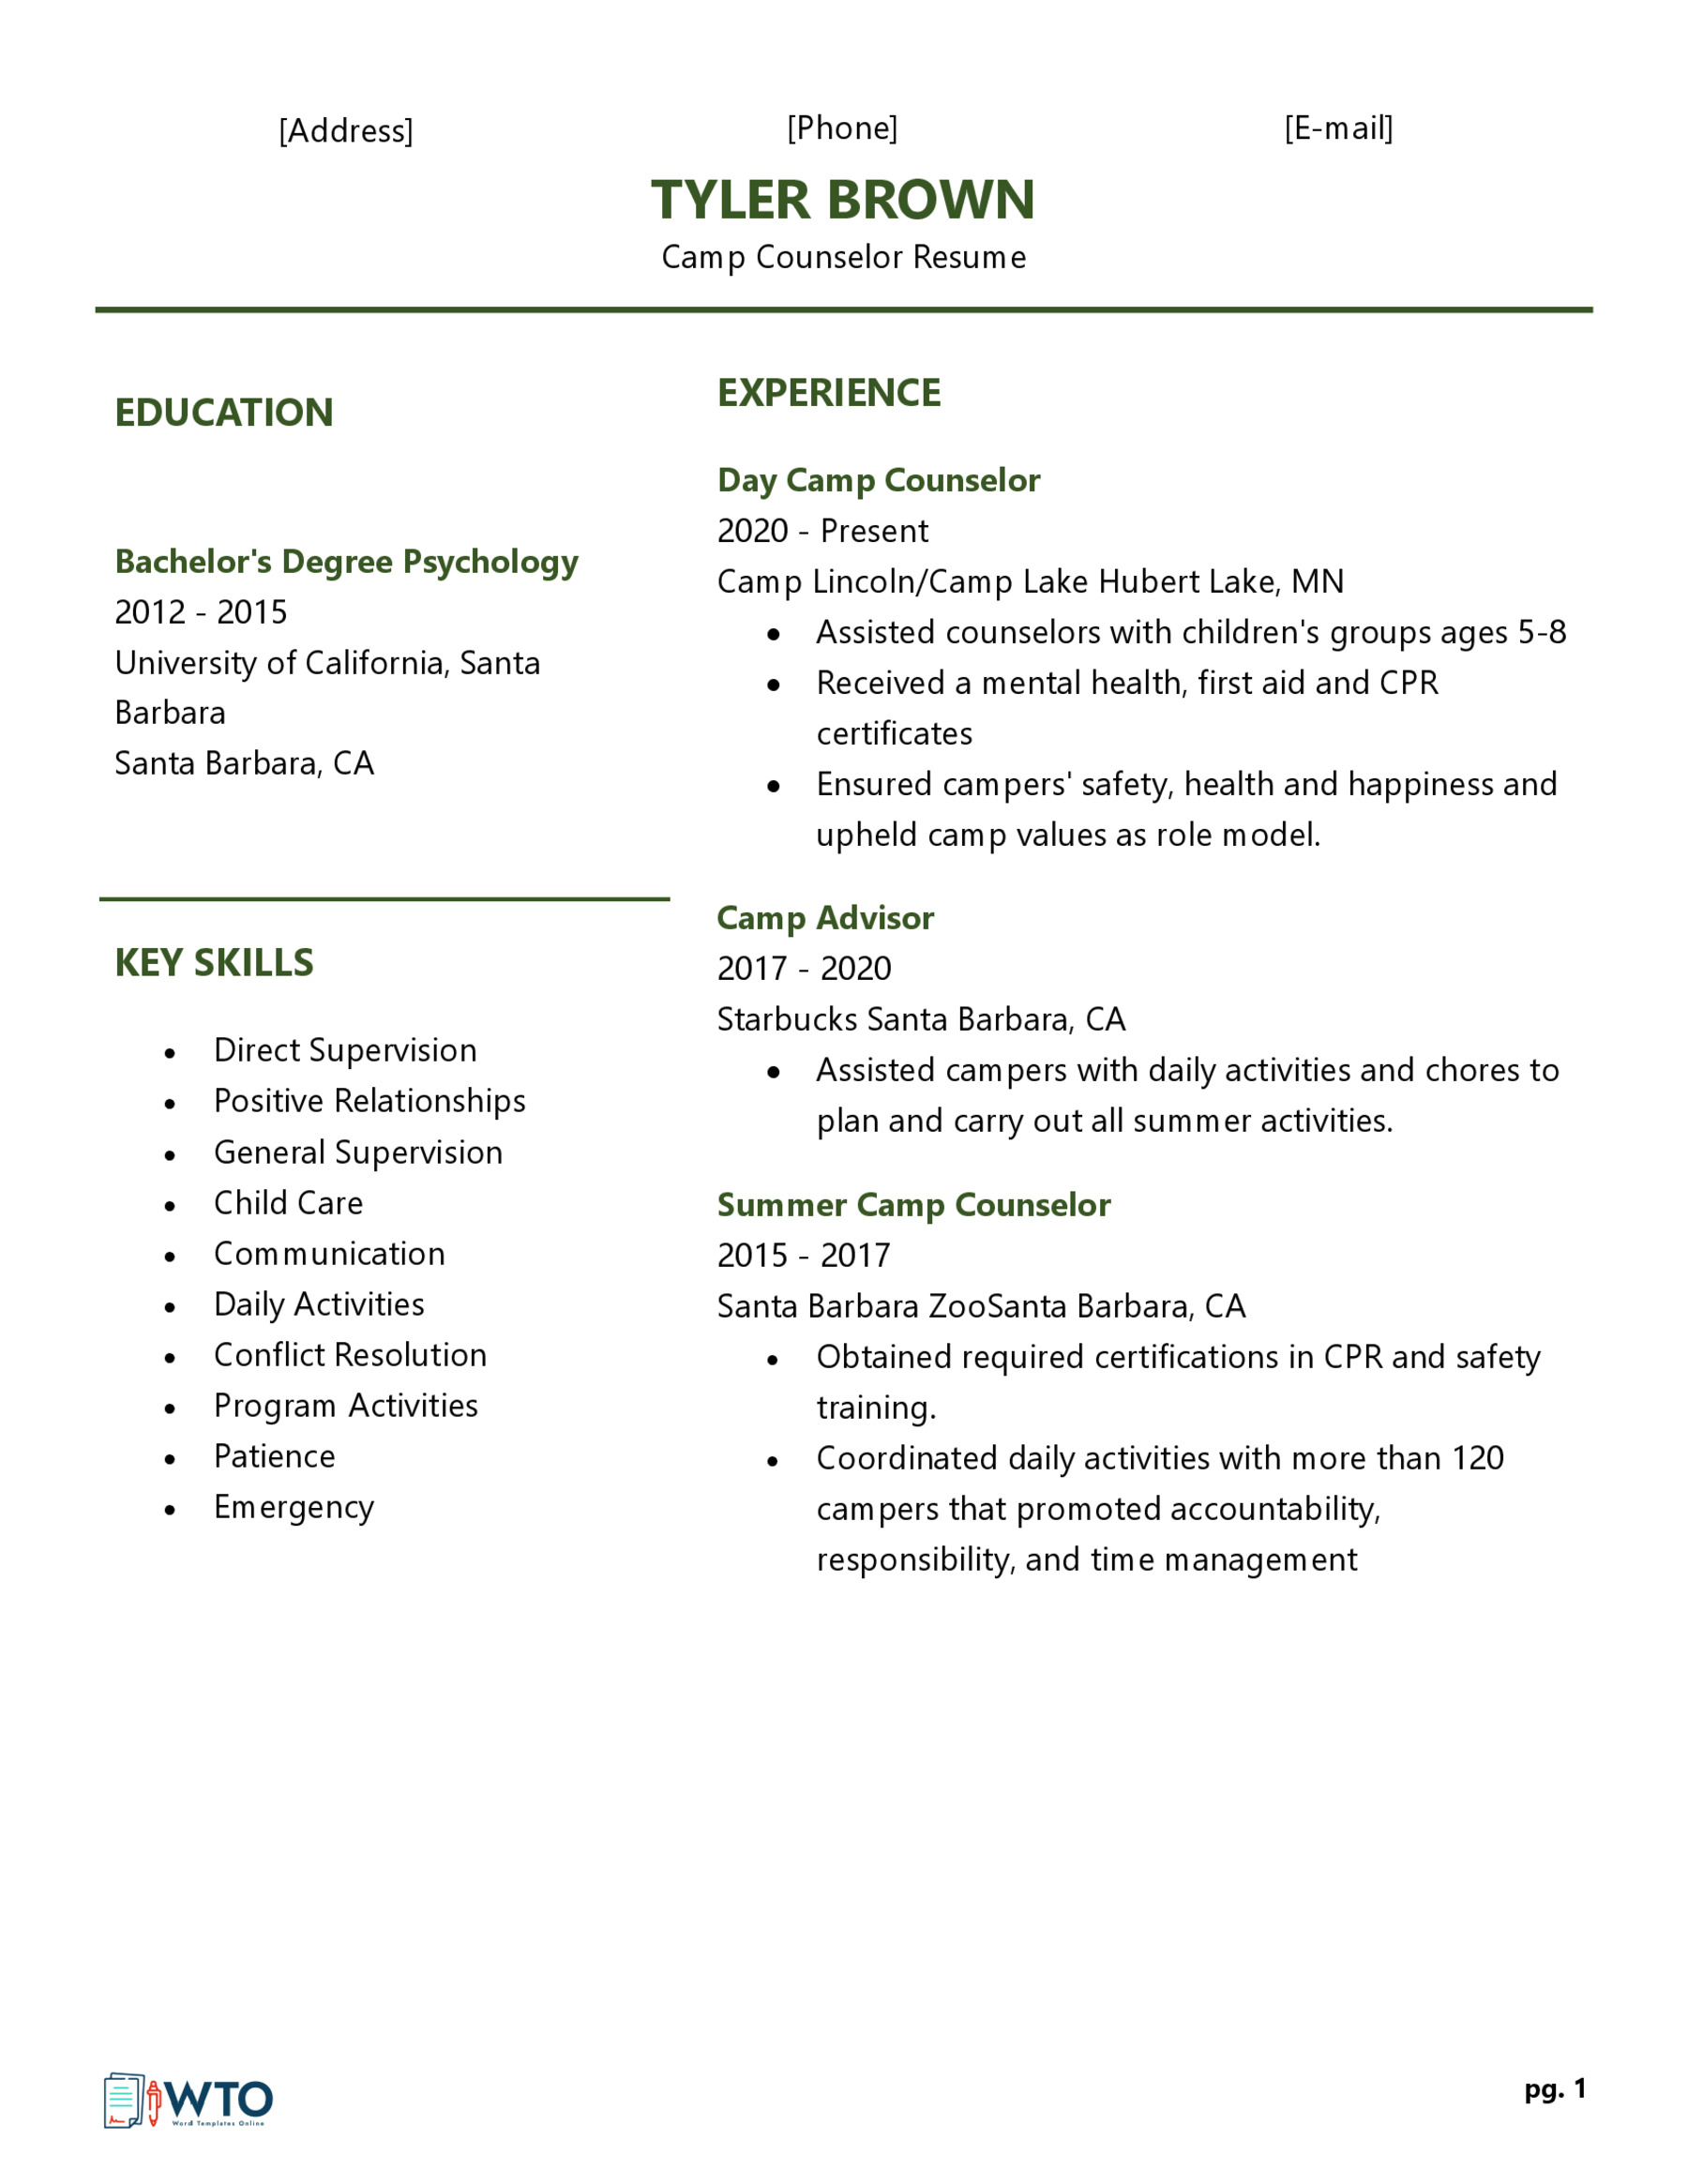 Camp Counselor Resume - Creative and Eye-catching Template